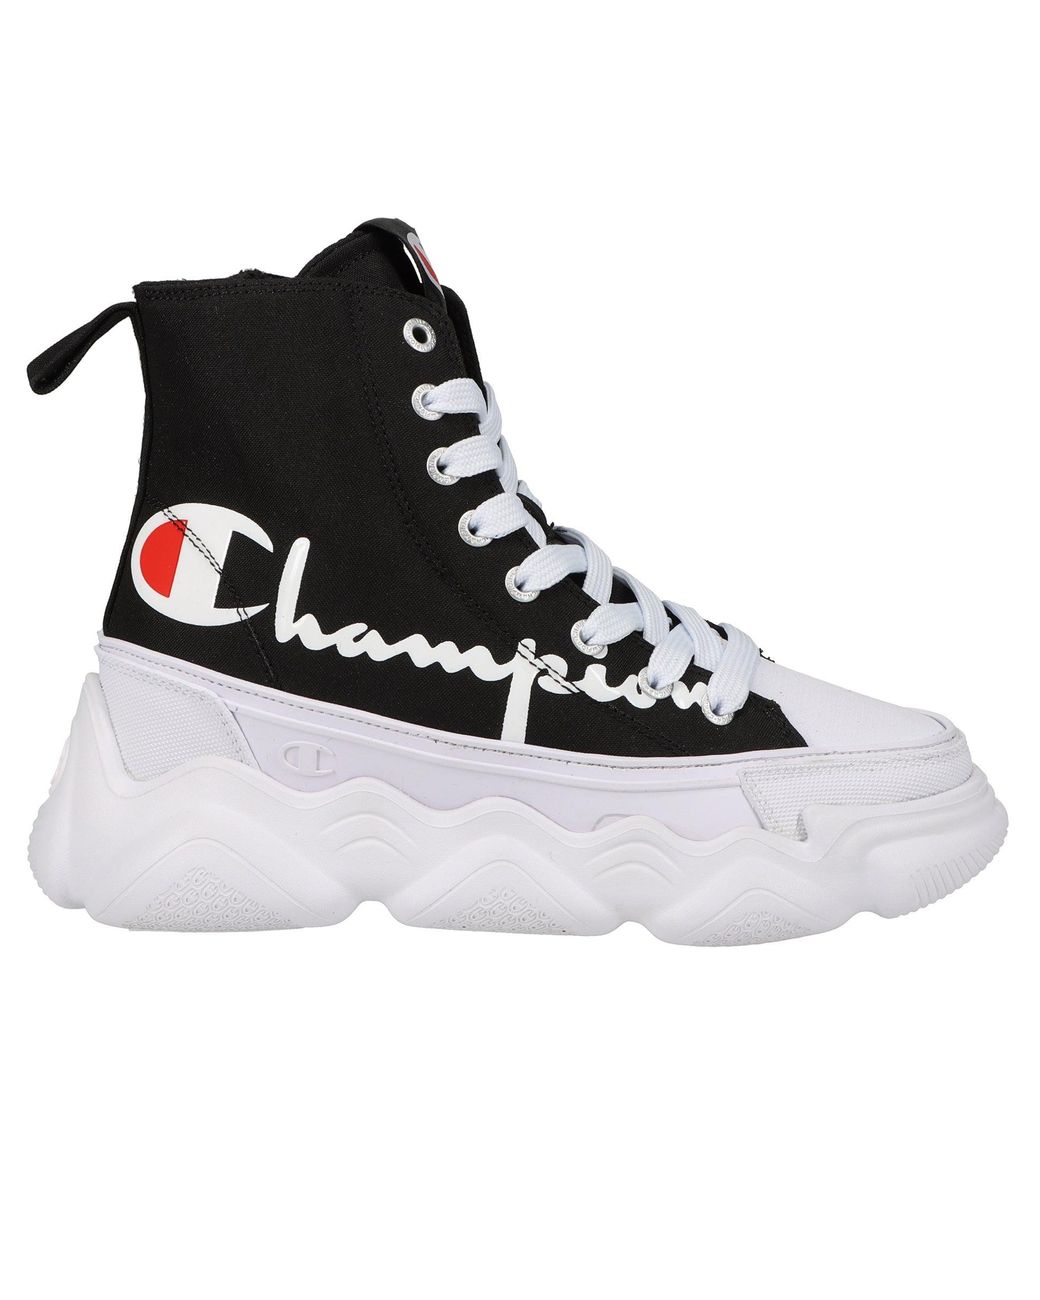 Champion Meloso Prodigy Hi Shoes in Black | Lyst